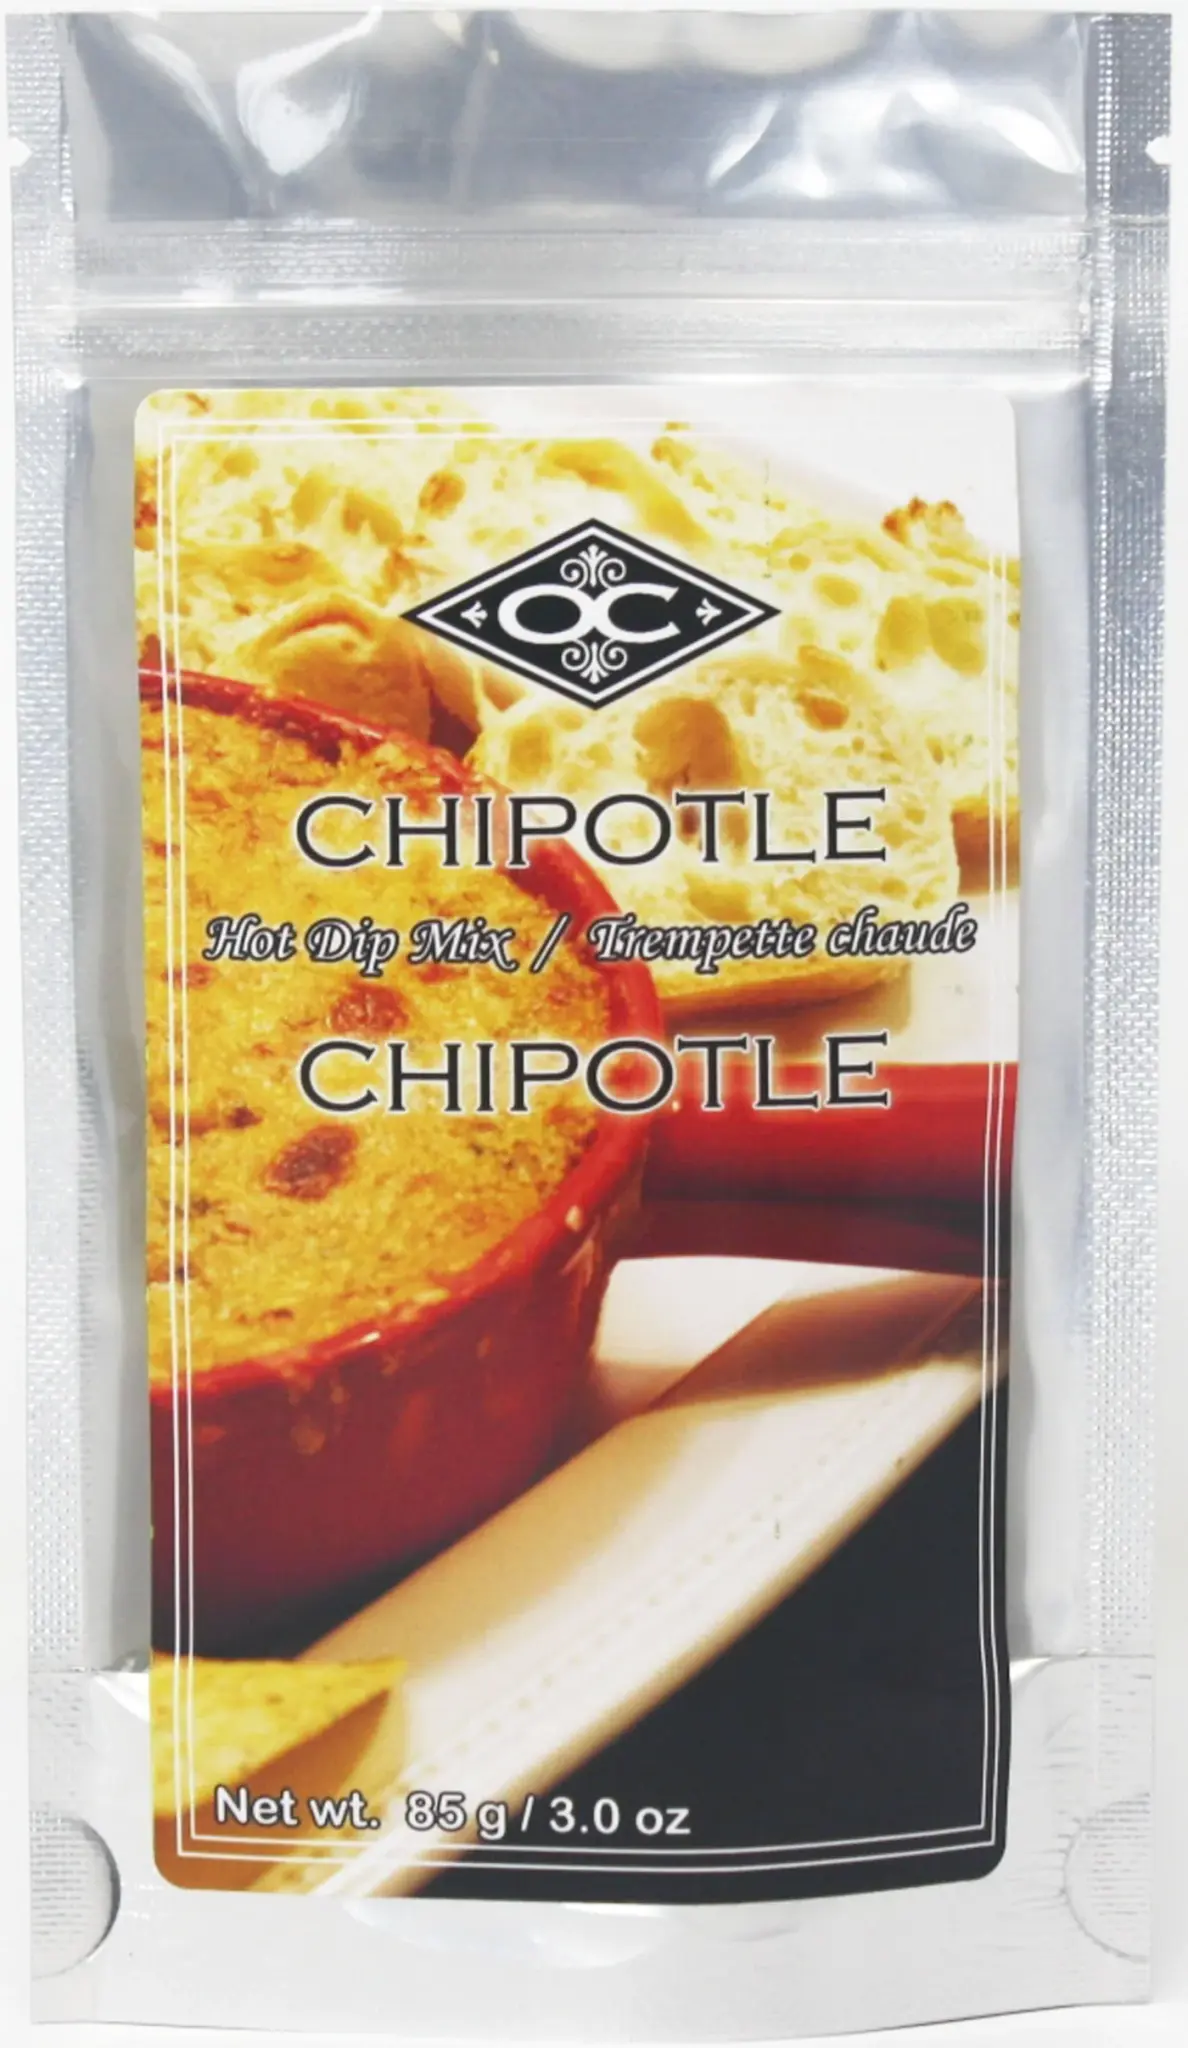 Orange Crate Food Co Hot Dip Mix 30g Foil Package Chipotle